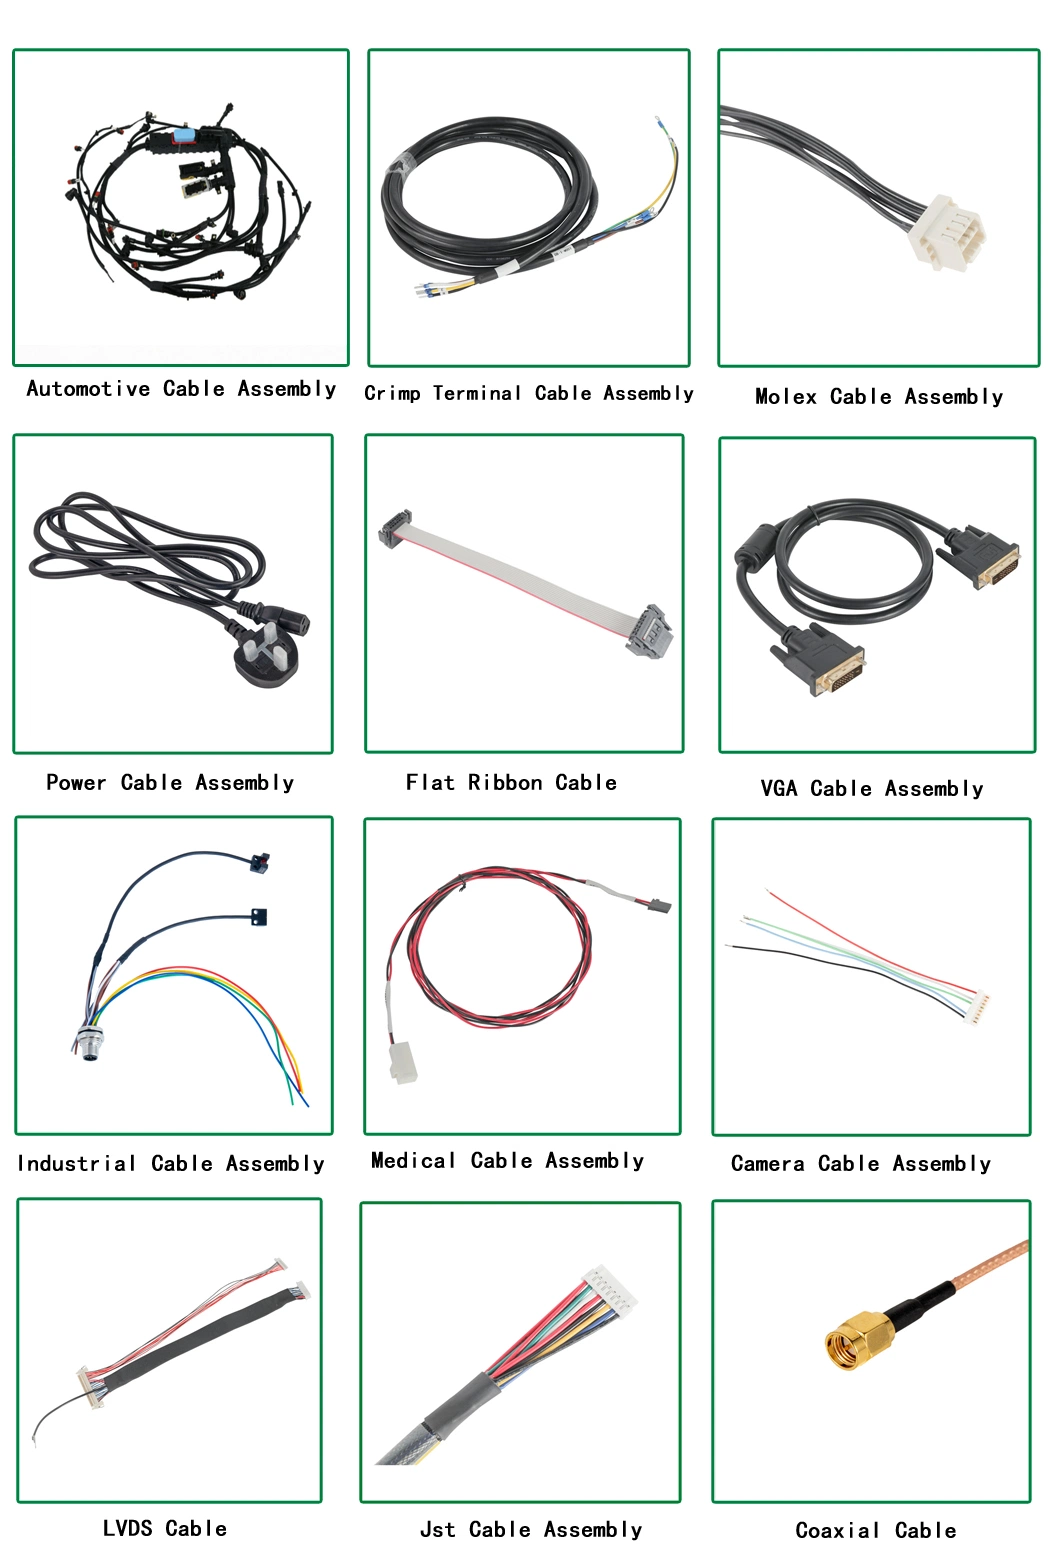 Engine Cable OEM Automotive Wiring Harness Manufacturer Automobile Motorcycle Auto Wire Harness